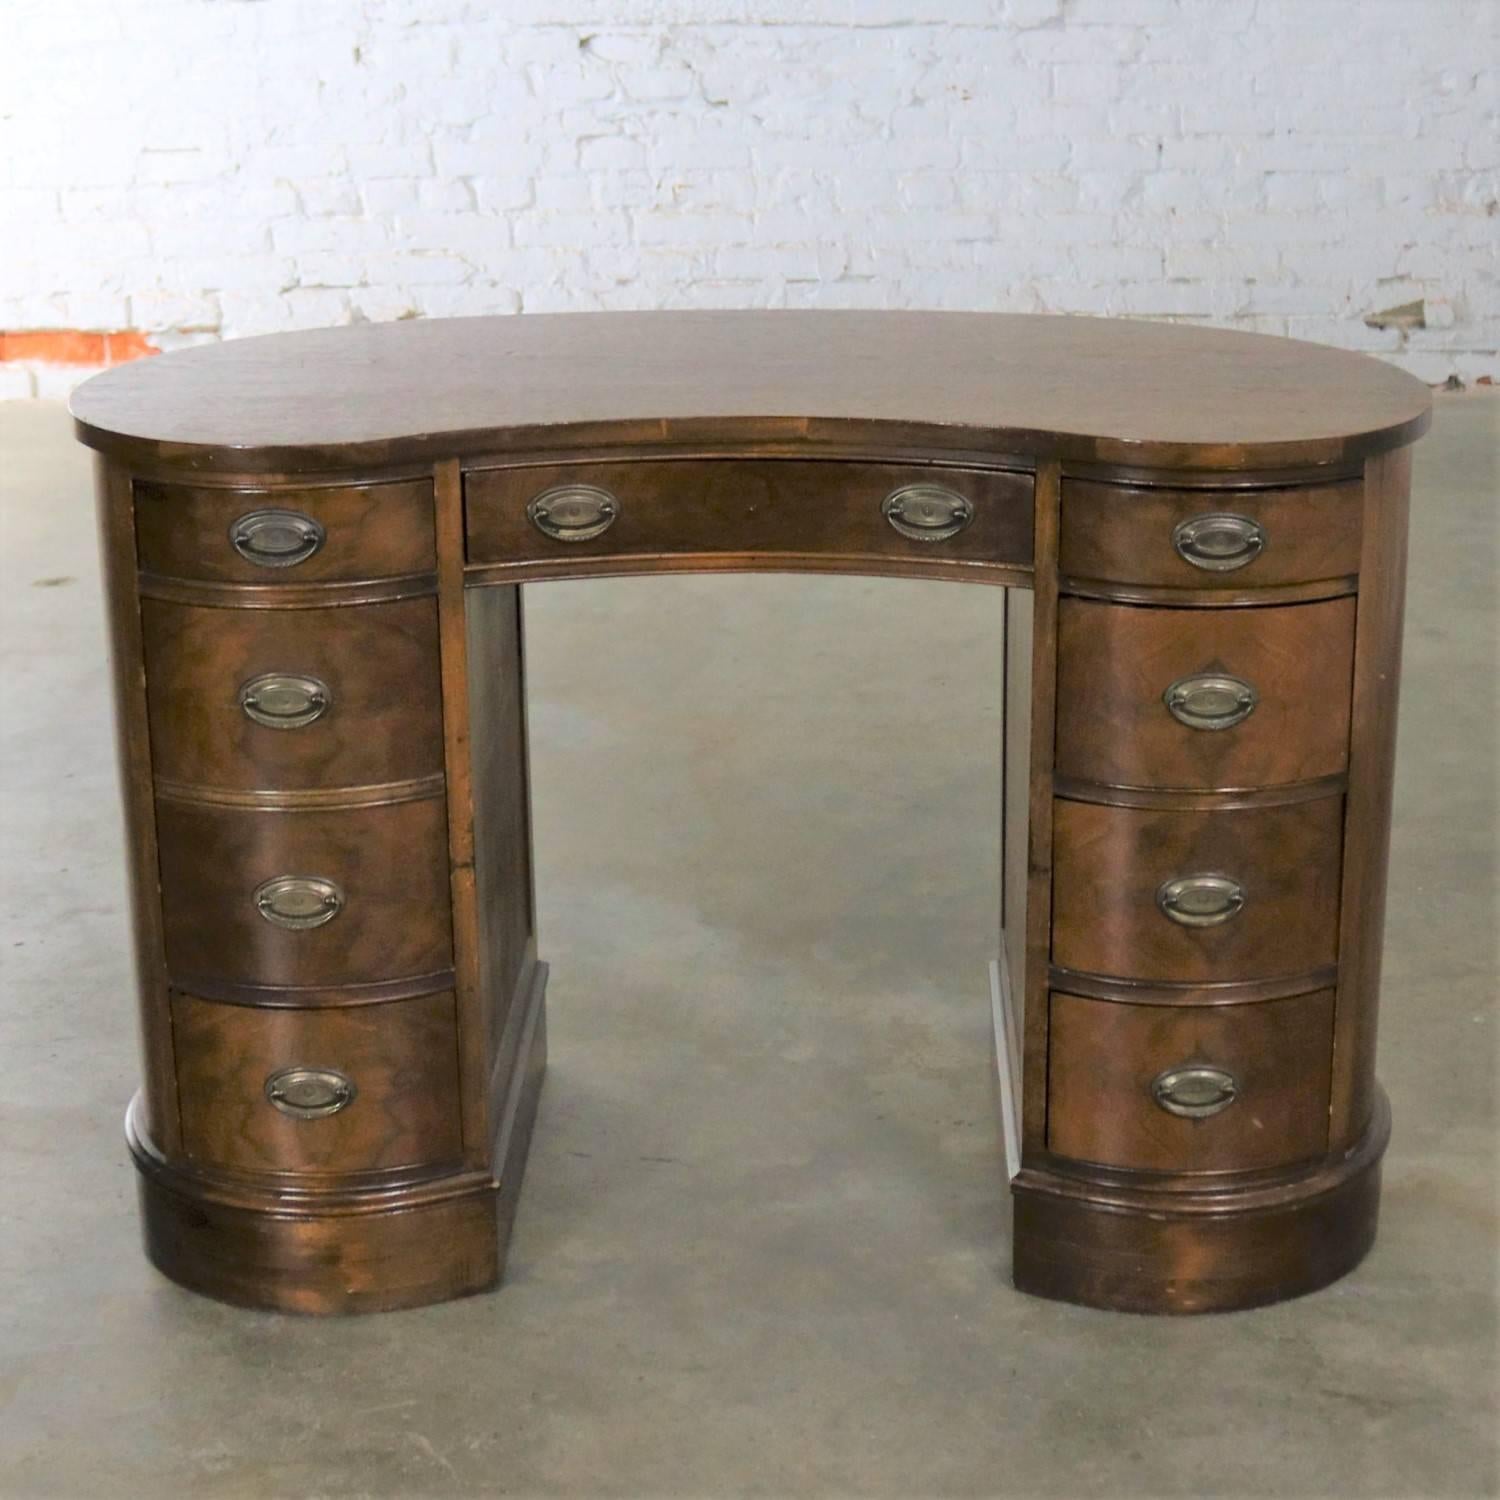 Pretty and petite Federal style walnut kidney shaped knee hole writing desk. In wonderful antique condition with natural age-related nicks and dings but nothing major, circa 1940s-1950s.

This desk is so adorable. Kidney shaped Federal style and